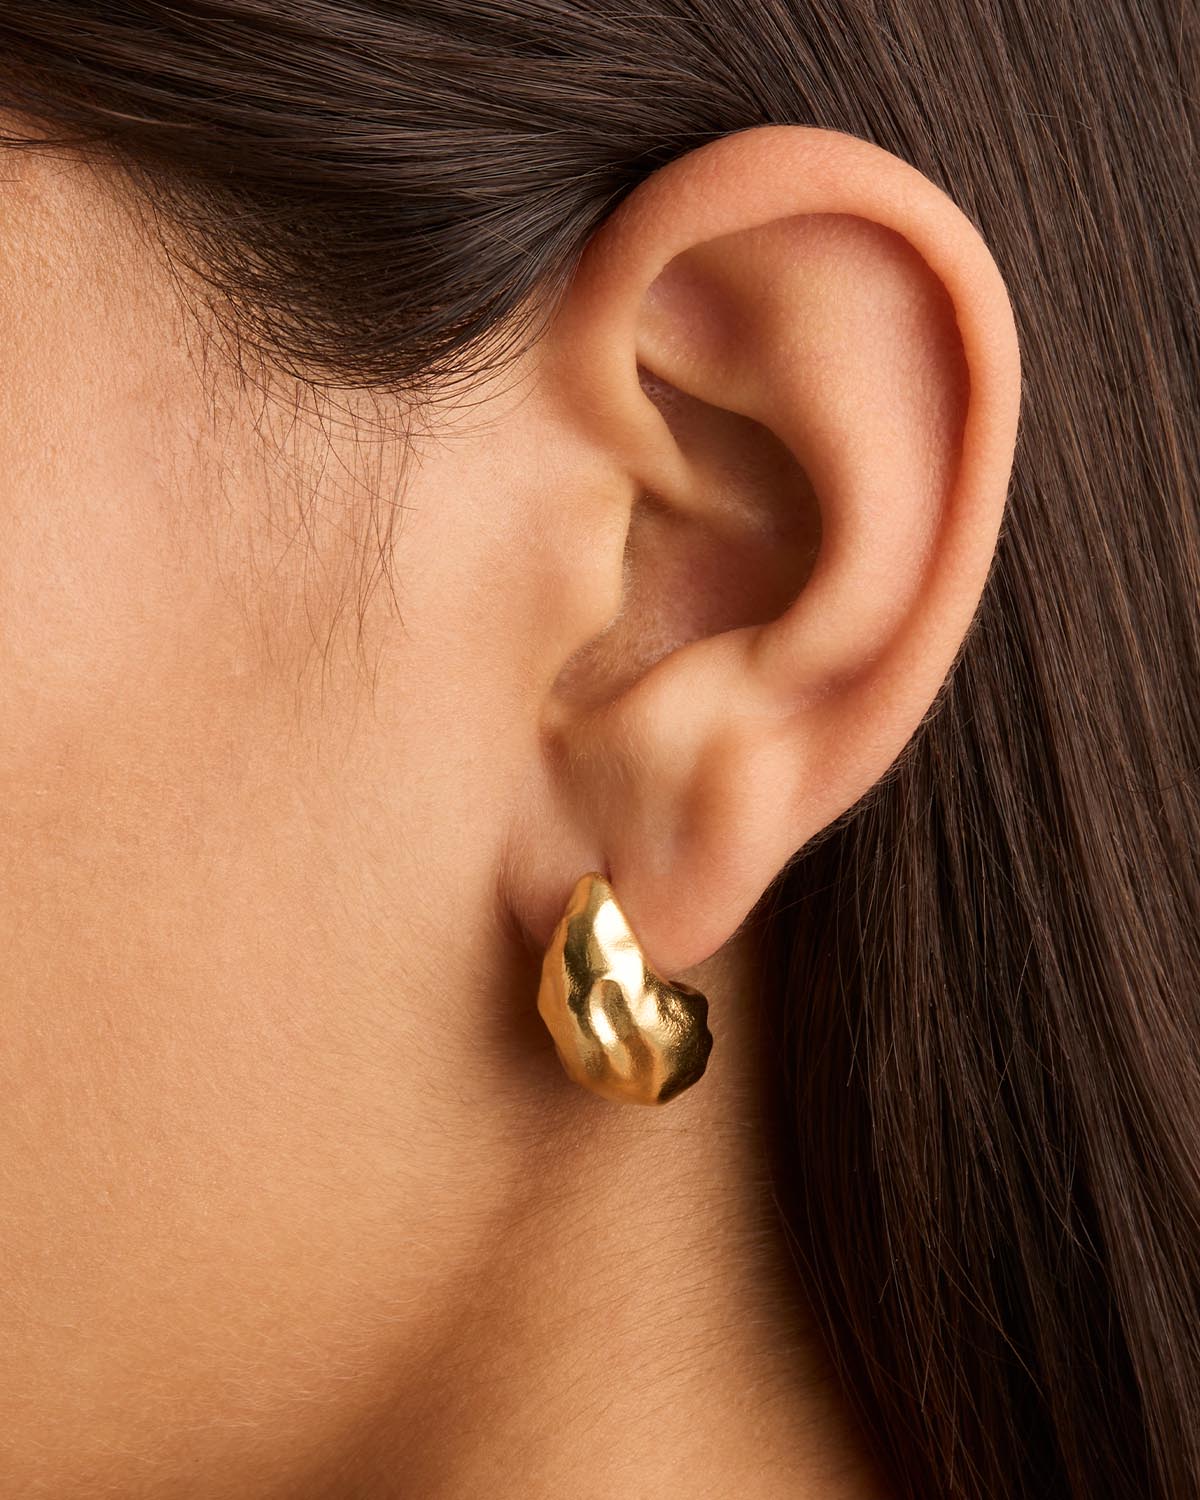 80mm Diameter 18k Gold Layered Thin Thread Hoop Earrings, Large Gold P –  Bella Joias Miami